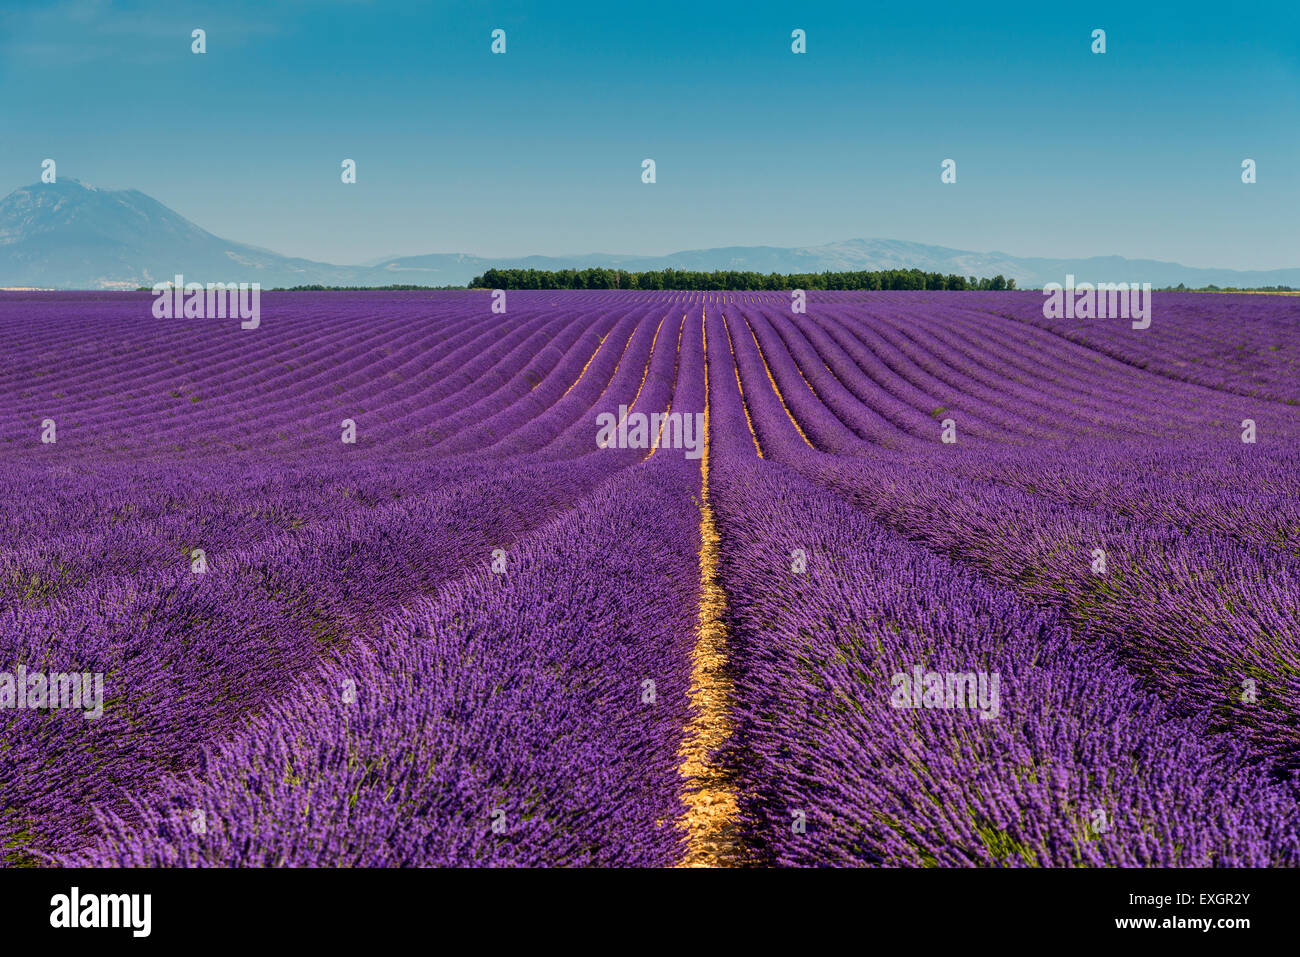 Lavender field in bloom at Plateau de Valensole, Provence, France Stock Photo